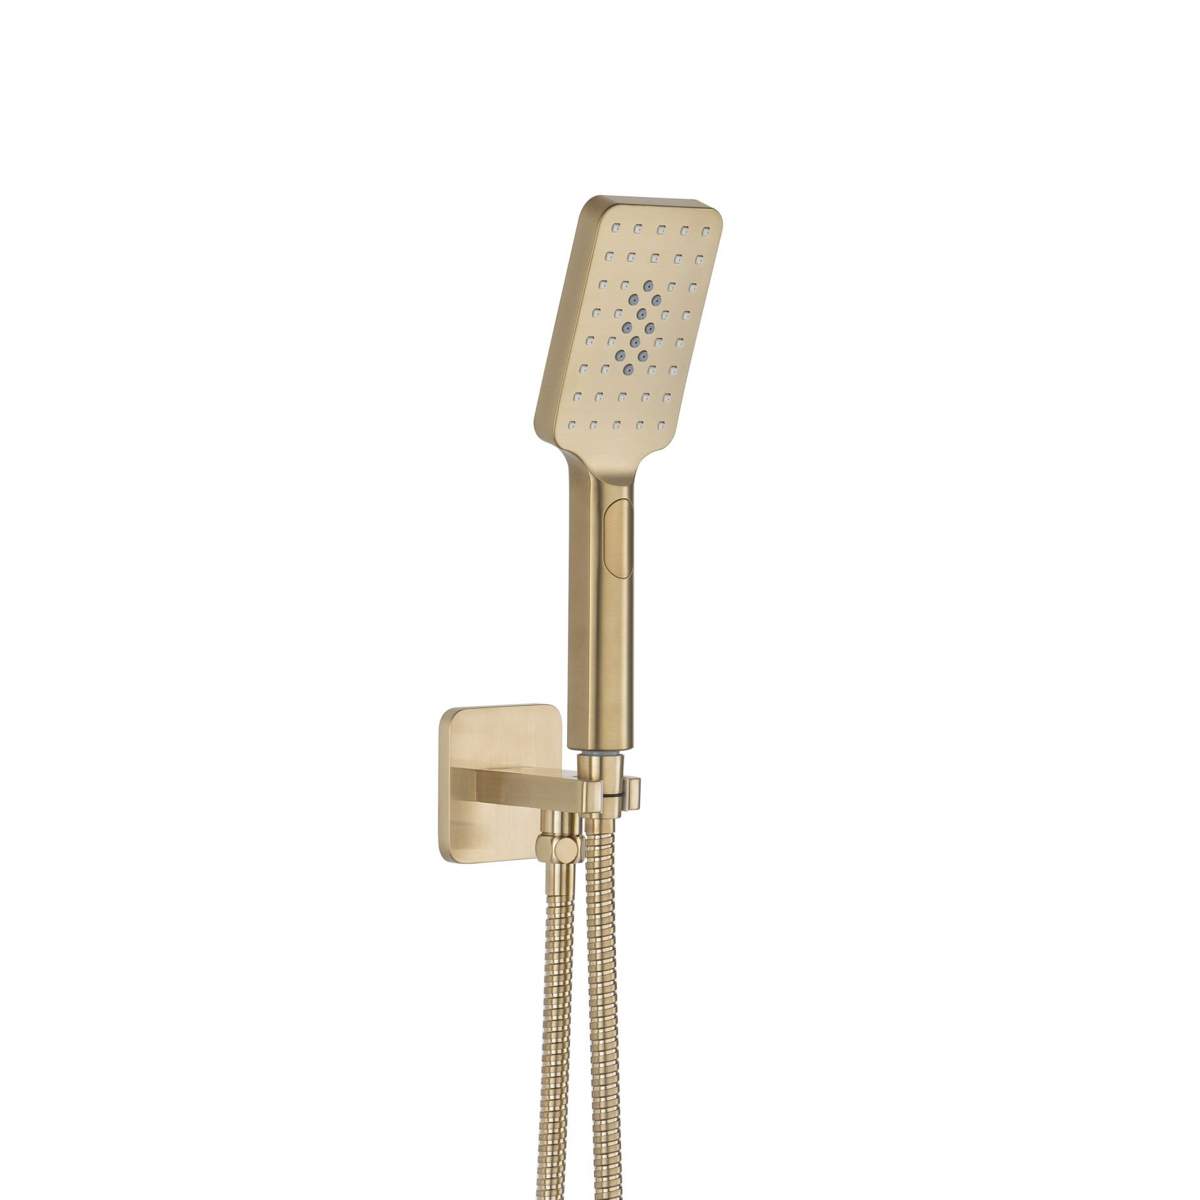 JTP Hix Brushed Brass Square Water Outlet with Holder, Hose and Hand Shower (33SQUARE/WS/BBR)